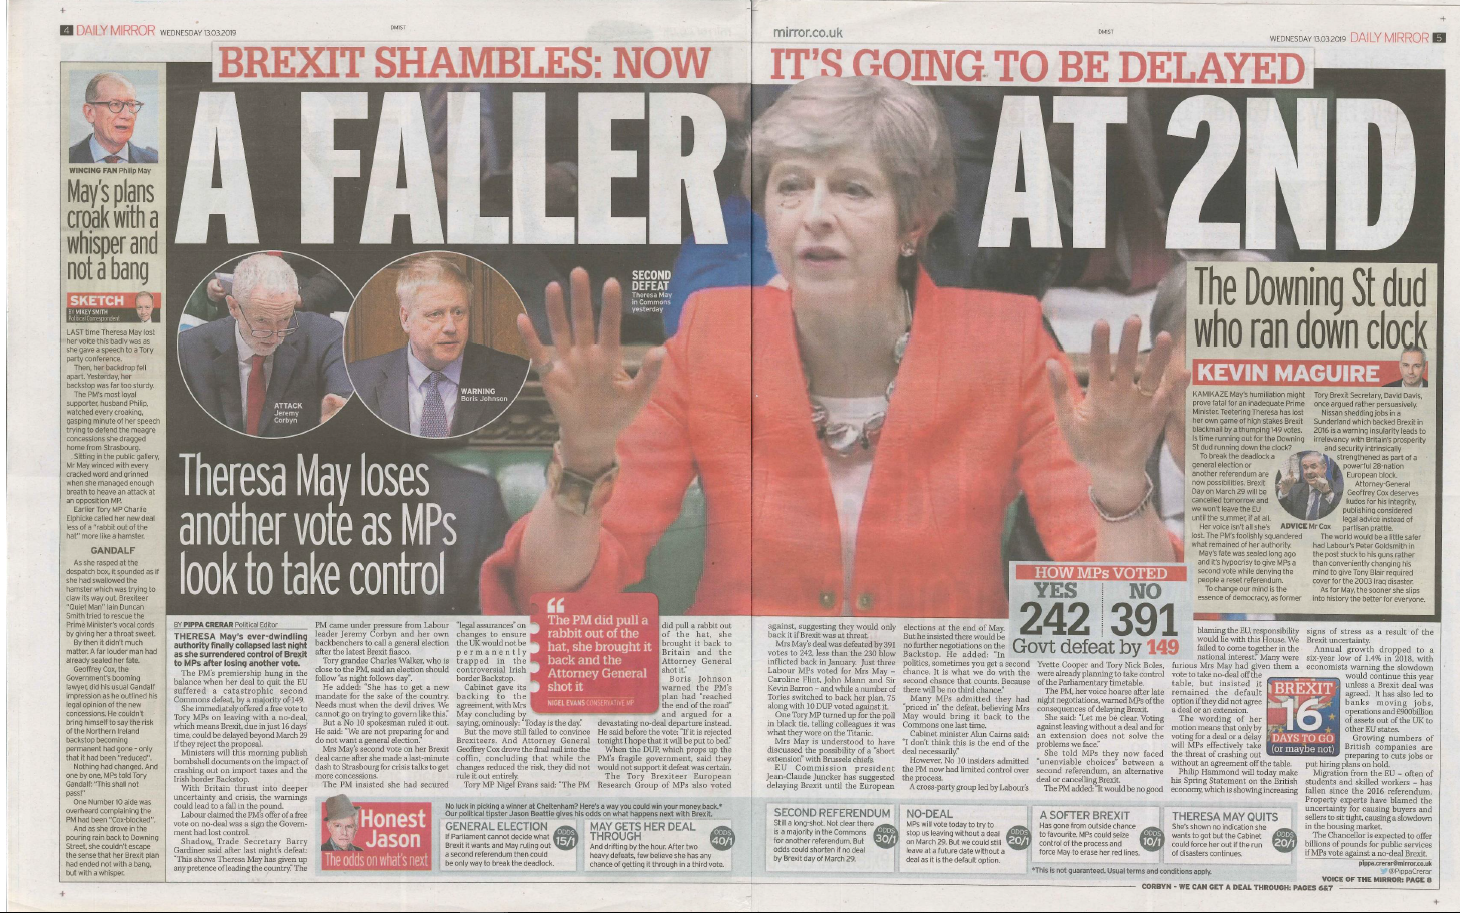 Media Studies: In analysis: The Daily Mirror set text (2019+ cohort)